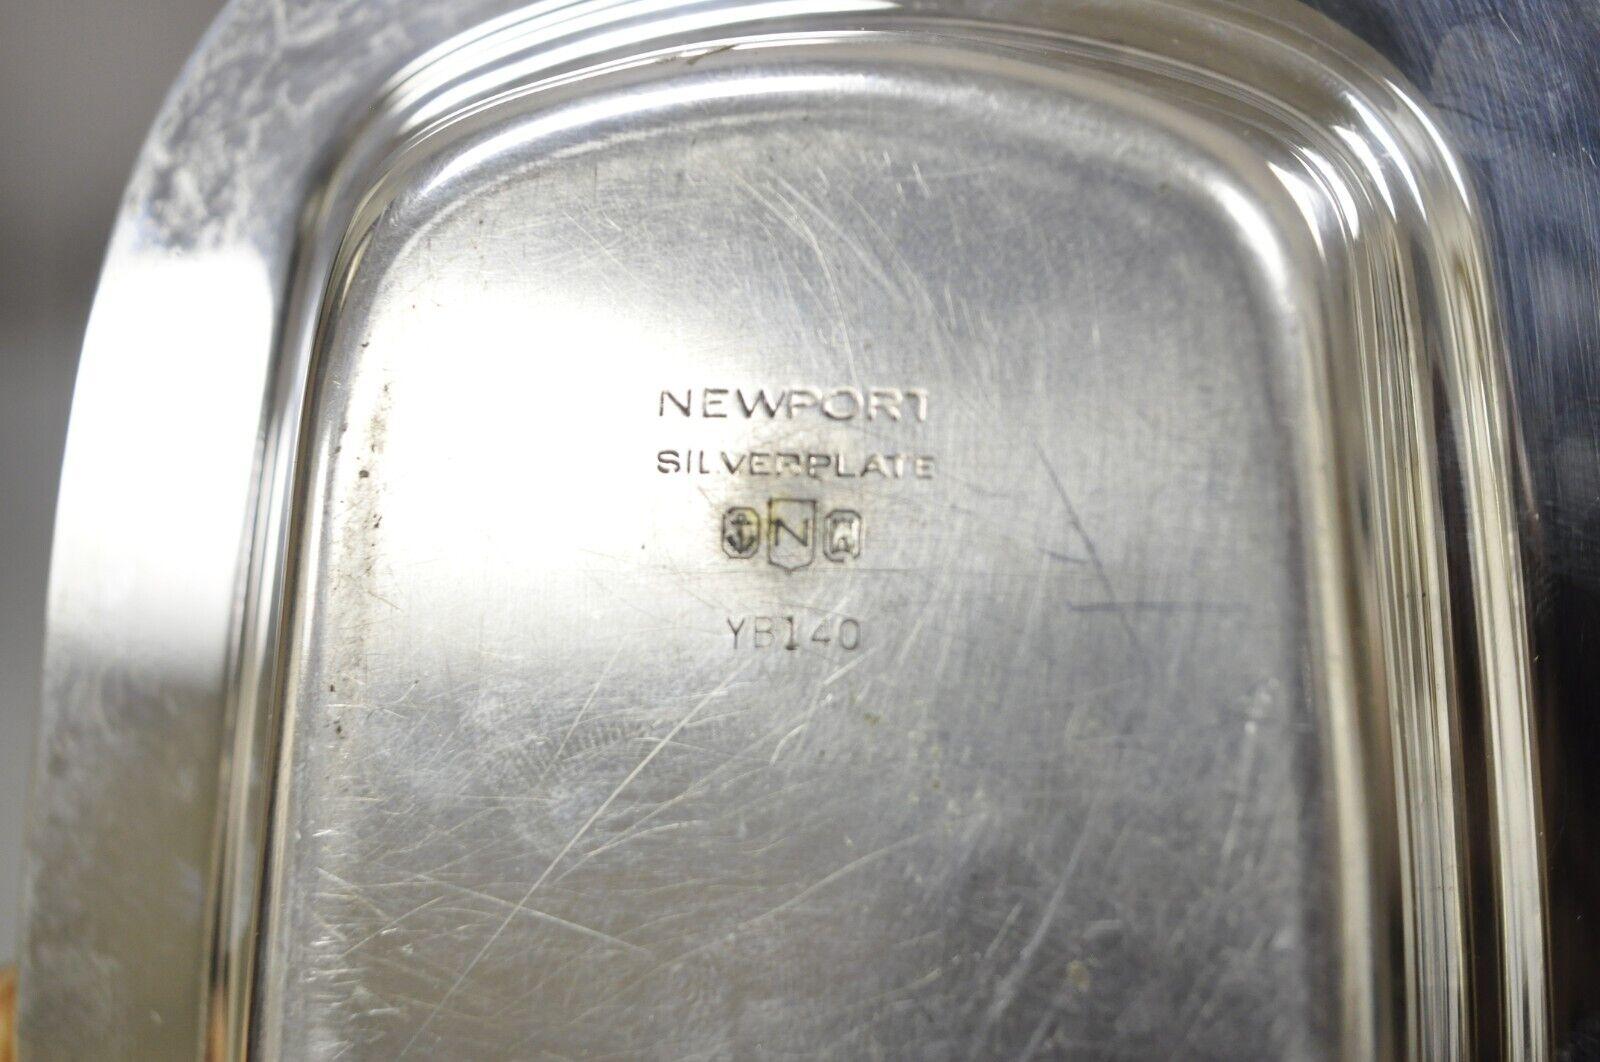 Vintage Newport Silver Plated Covered Butter Dish Tray with Lid 1